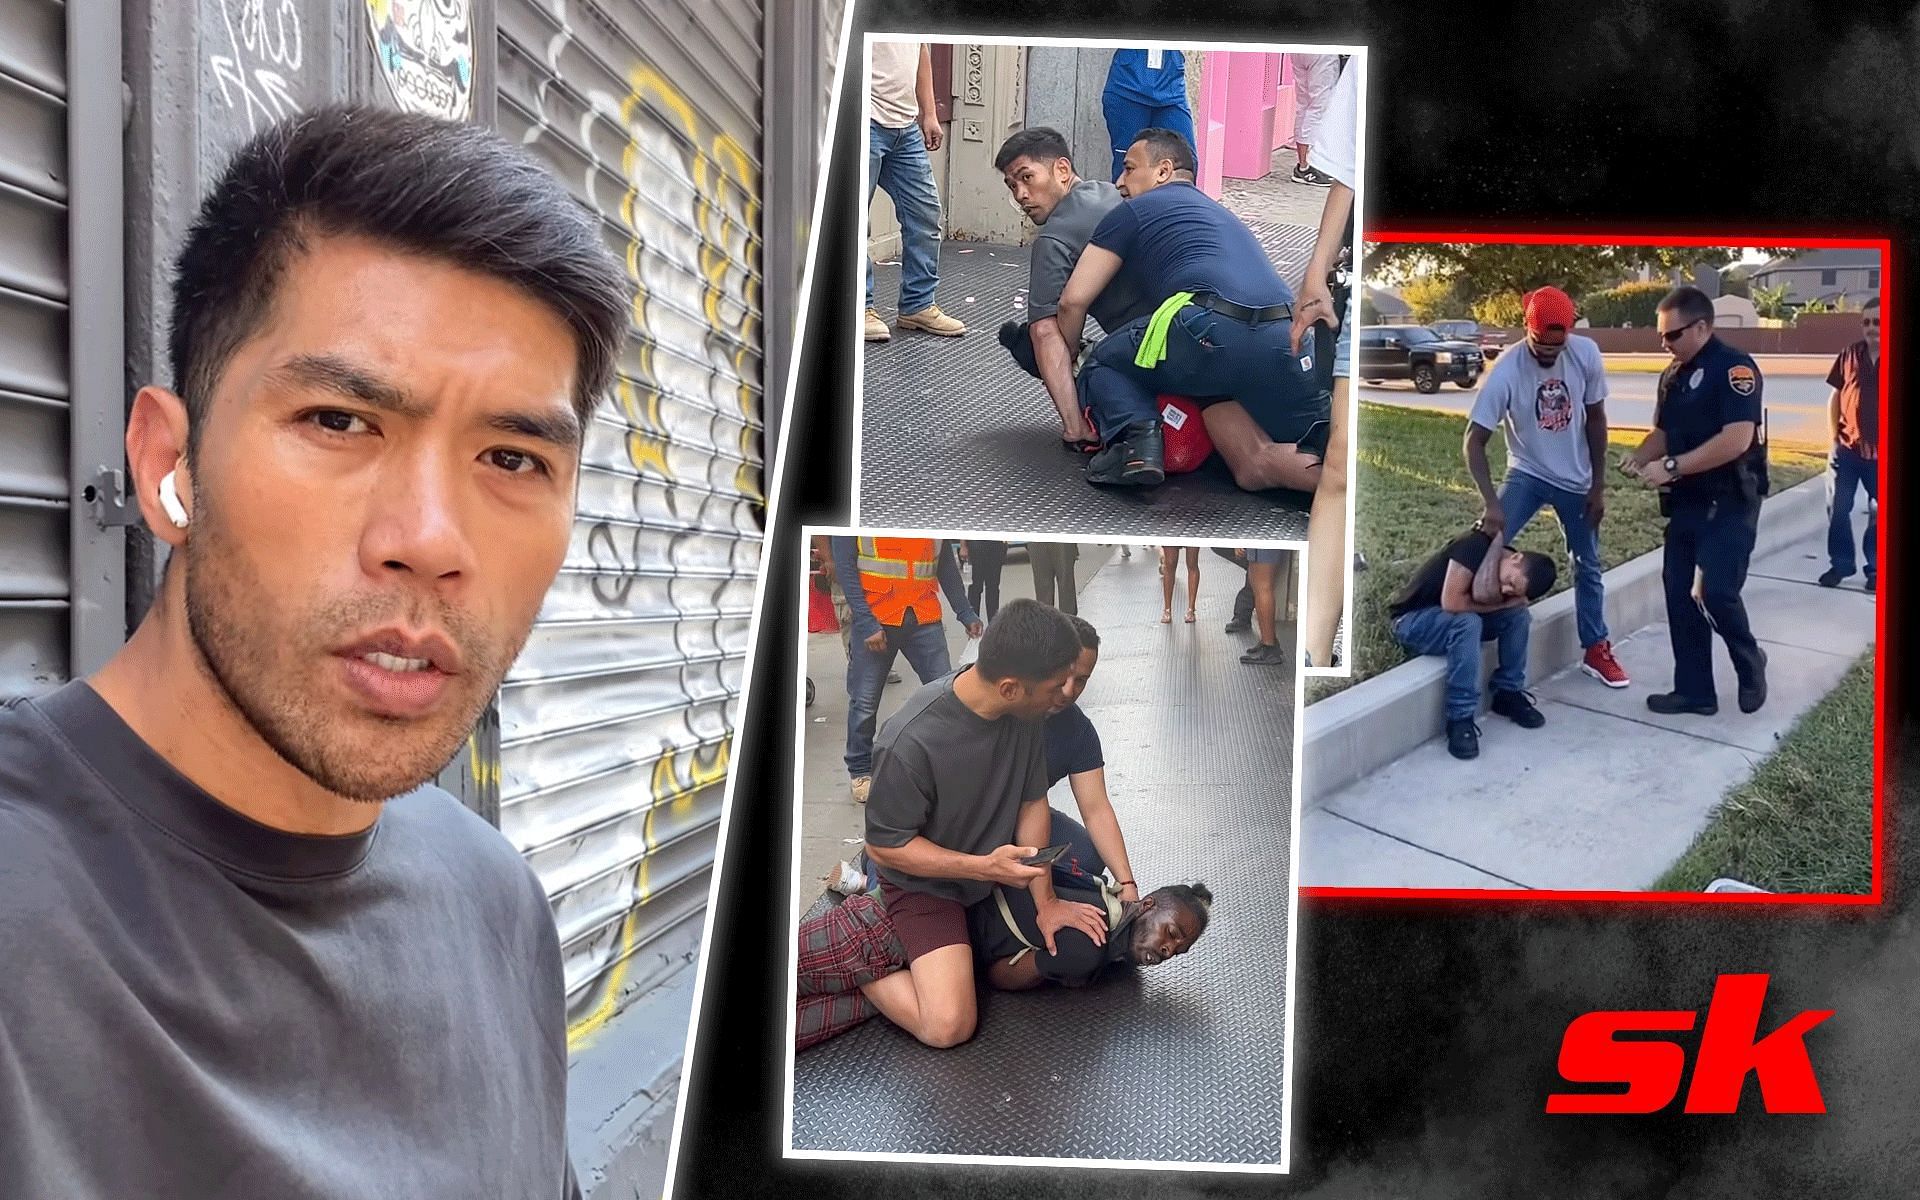 Fans hail MMA fighter Ro Malabanan for stopping an attacker in NYC [Photo credit: mmajunkie on YouTube]